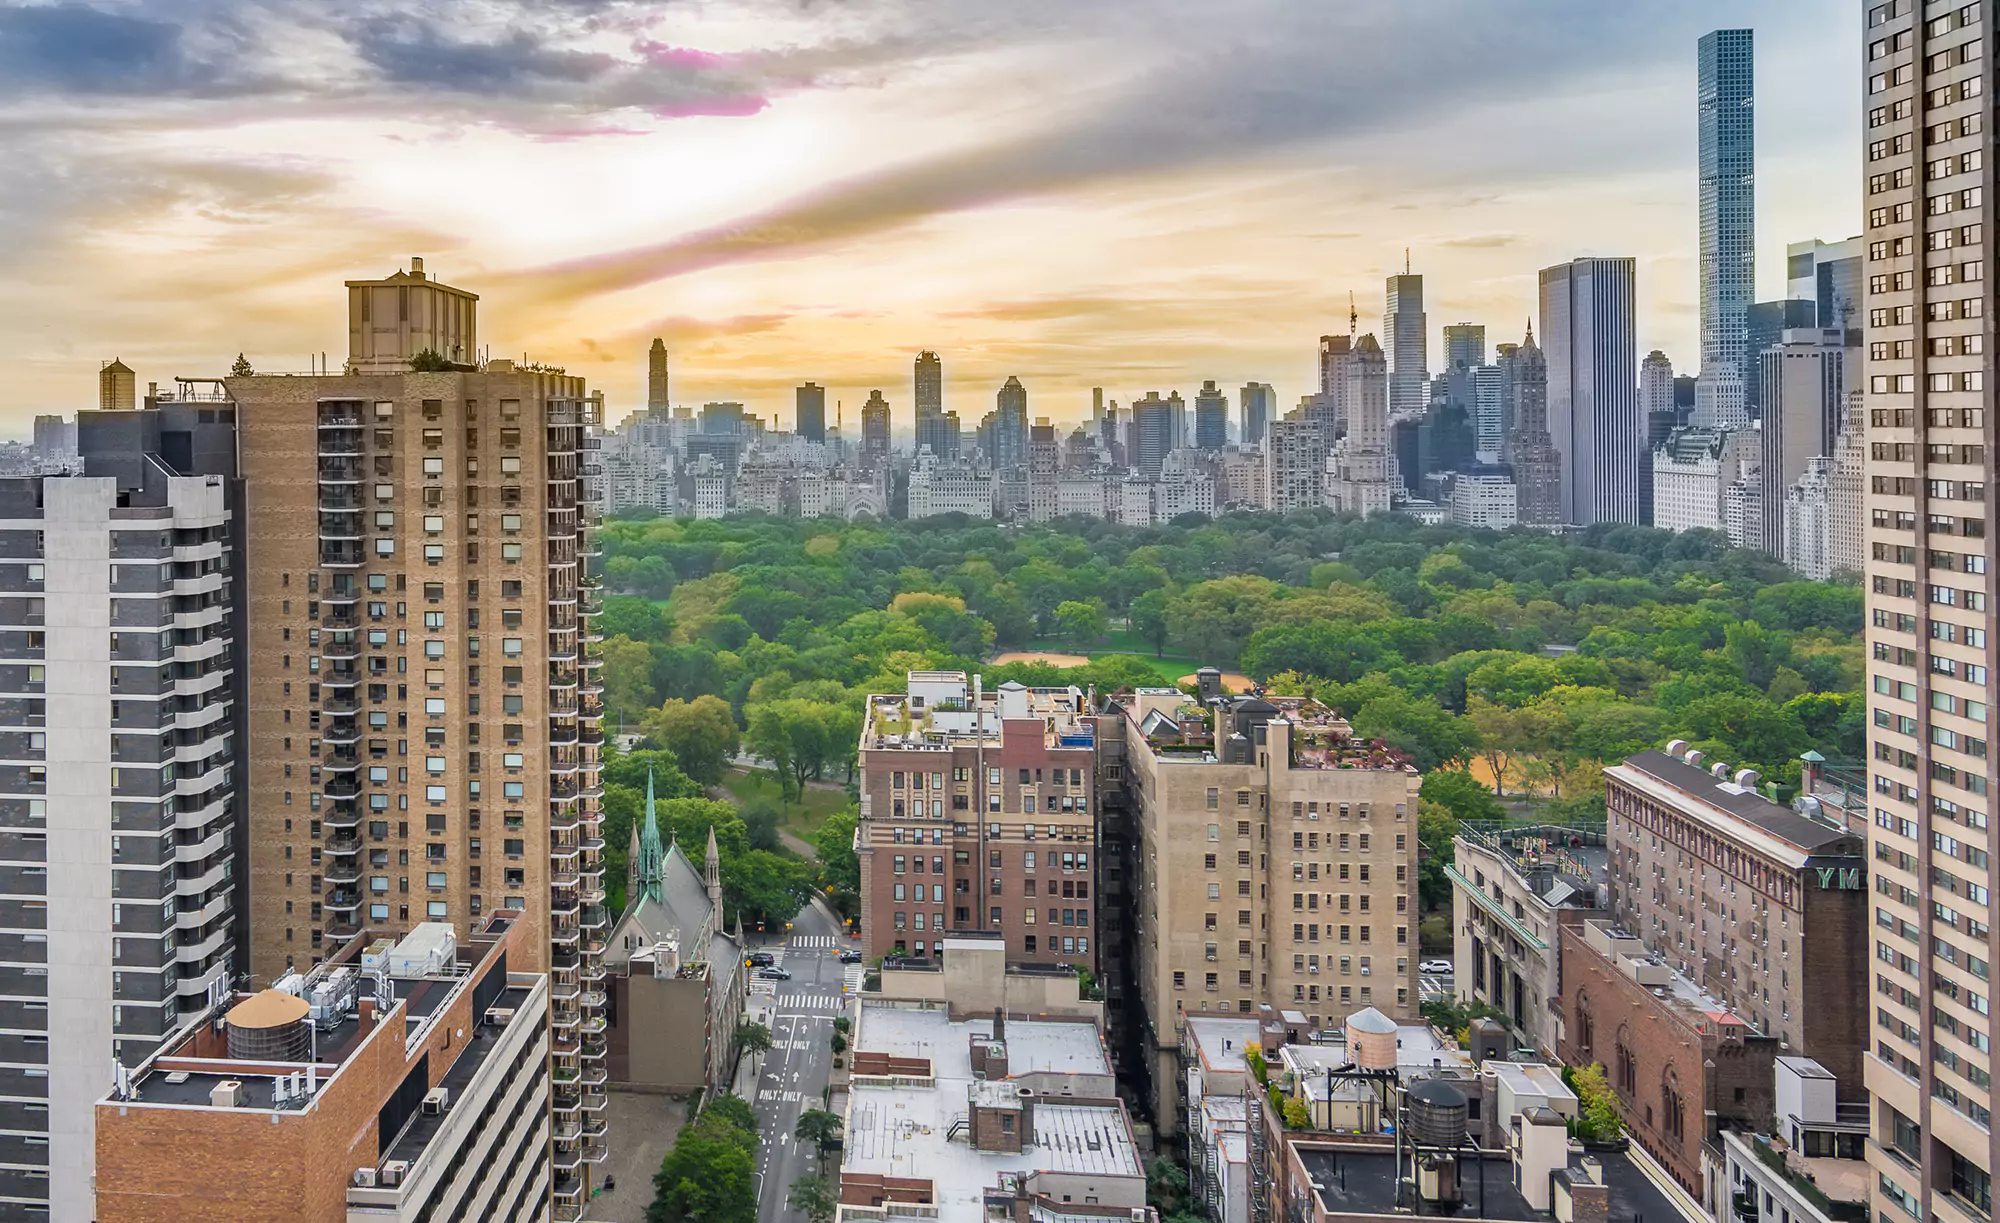 Aerial View of Manhattan Skyline, Skyrise Buildings, Central Park and Luxury Real Estate Market at Sunset